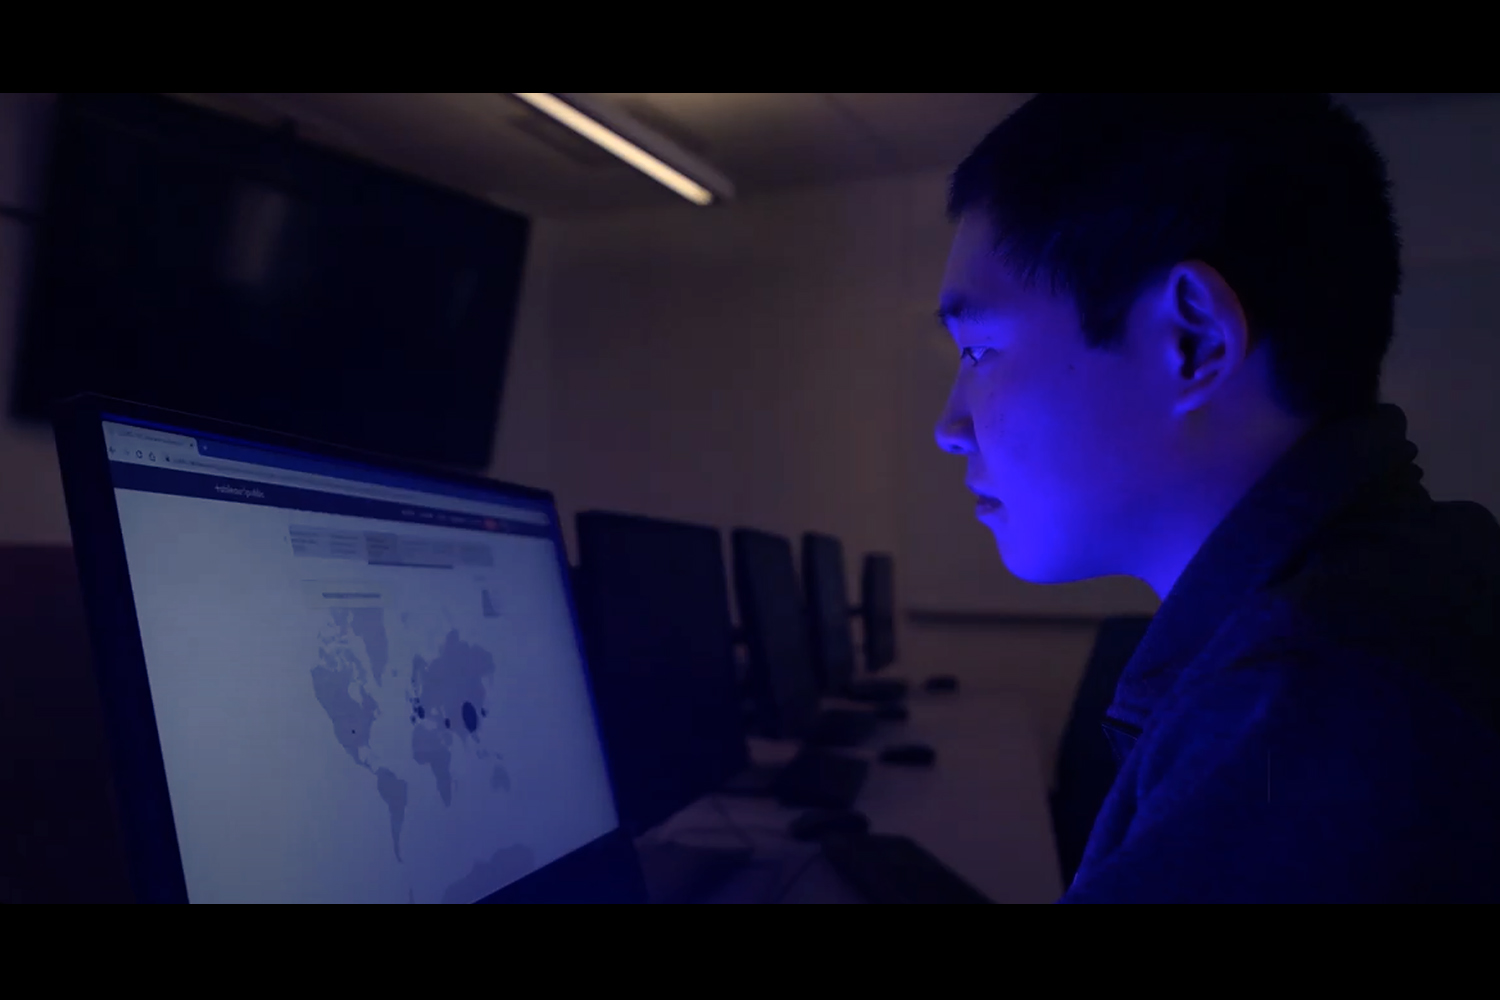 Yuansun (Sonny) Jiang looks at a laptop screen displaying a map of coronavirus cases worldwide in a dark room.